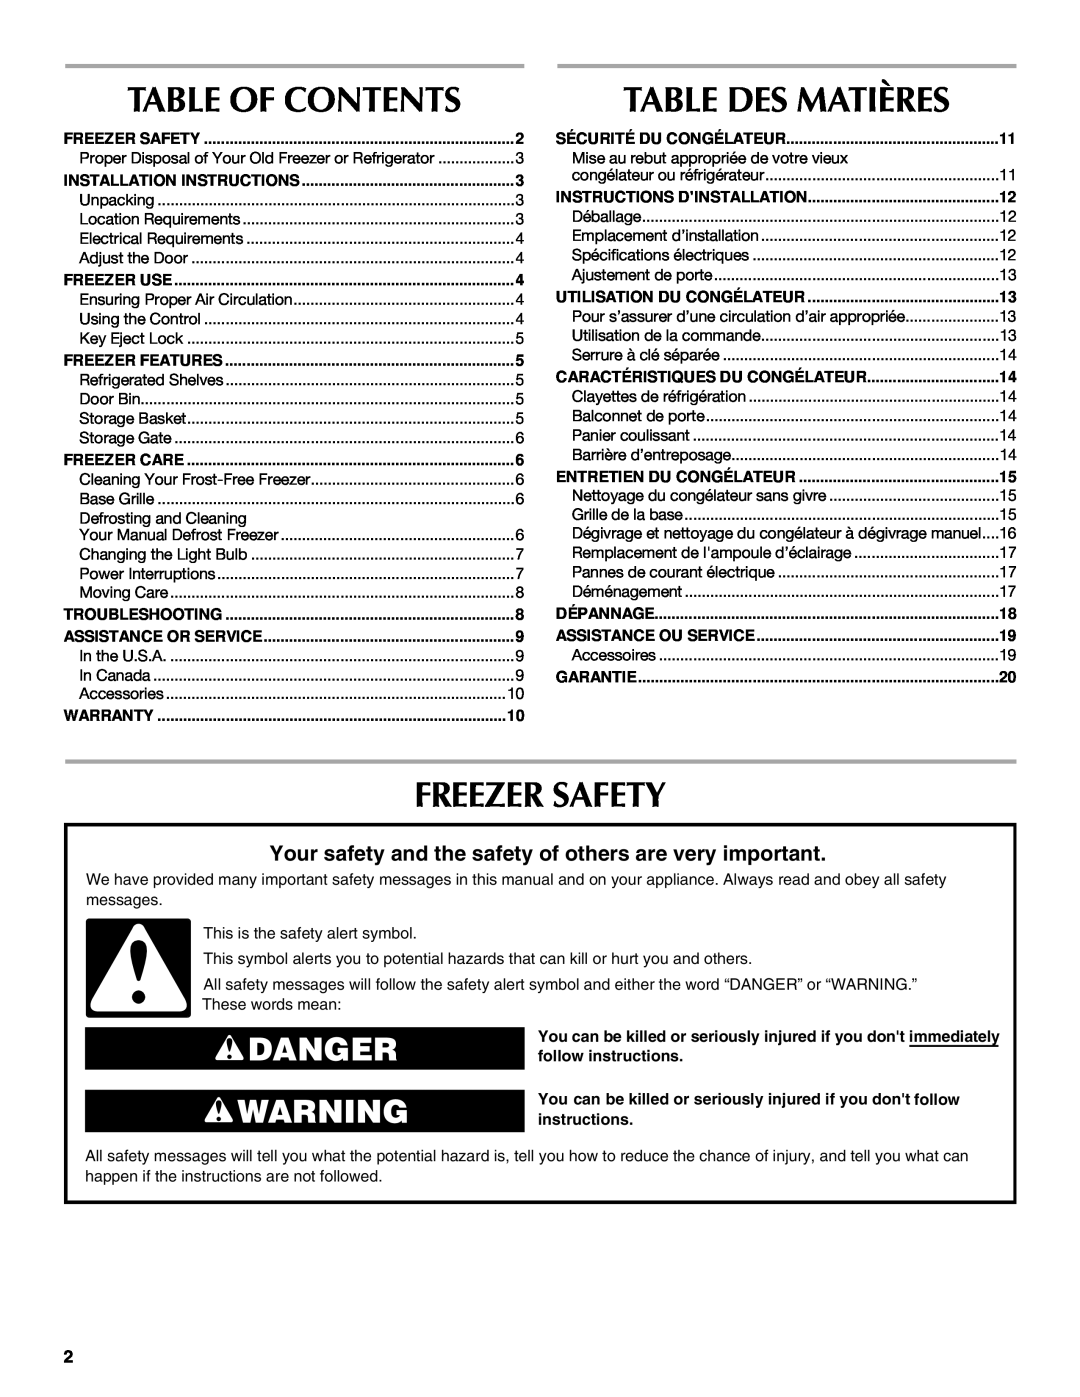 Maytag 1-82180-002 Table Of Contents, Freezer Safety, Danger, Your safety and the safety of others are very important 